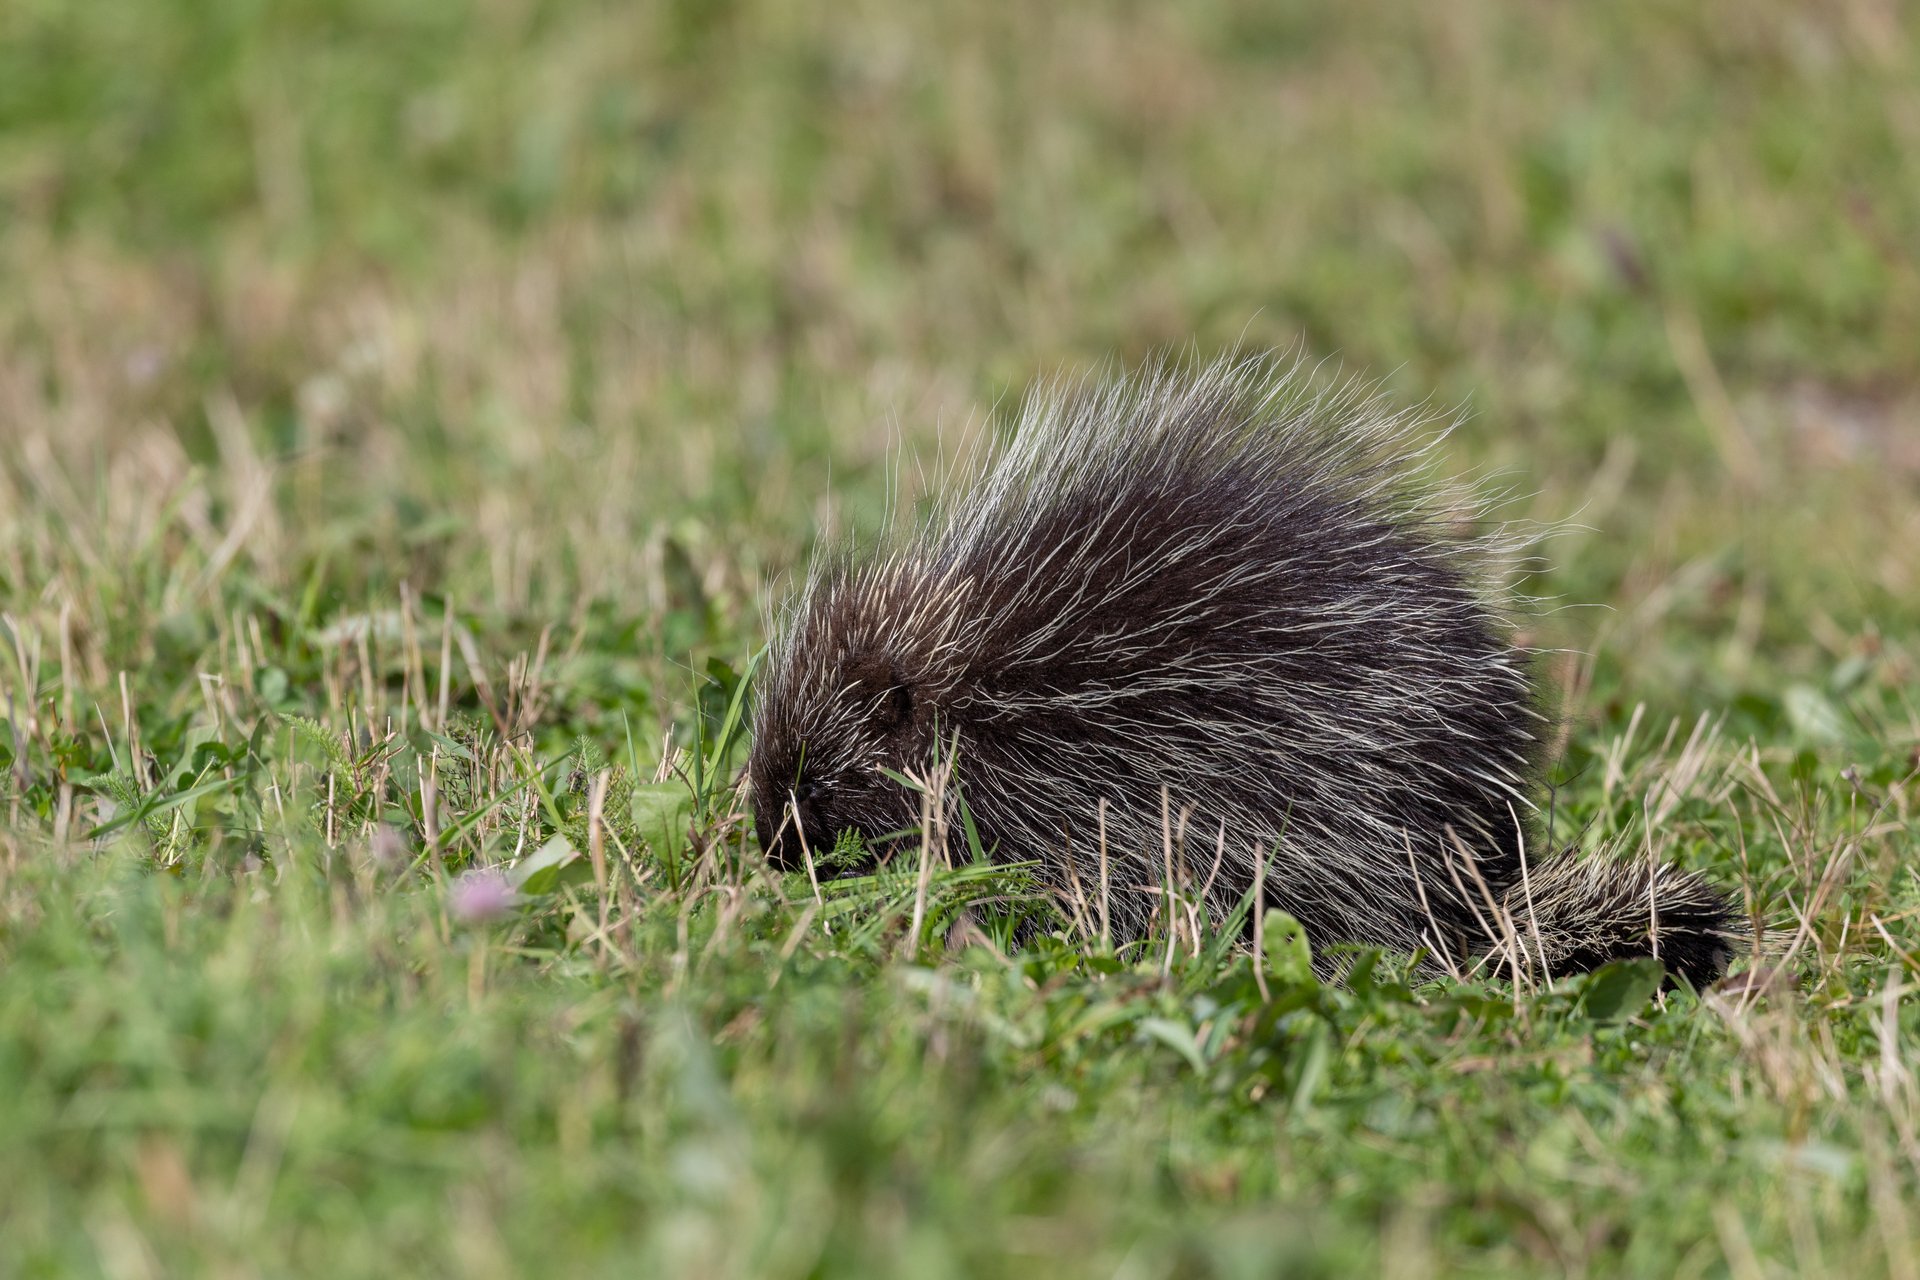 Porcupine in the grass.